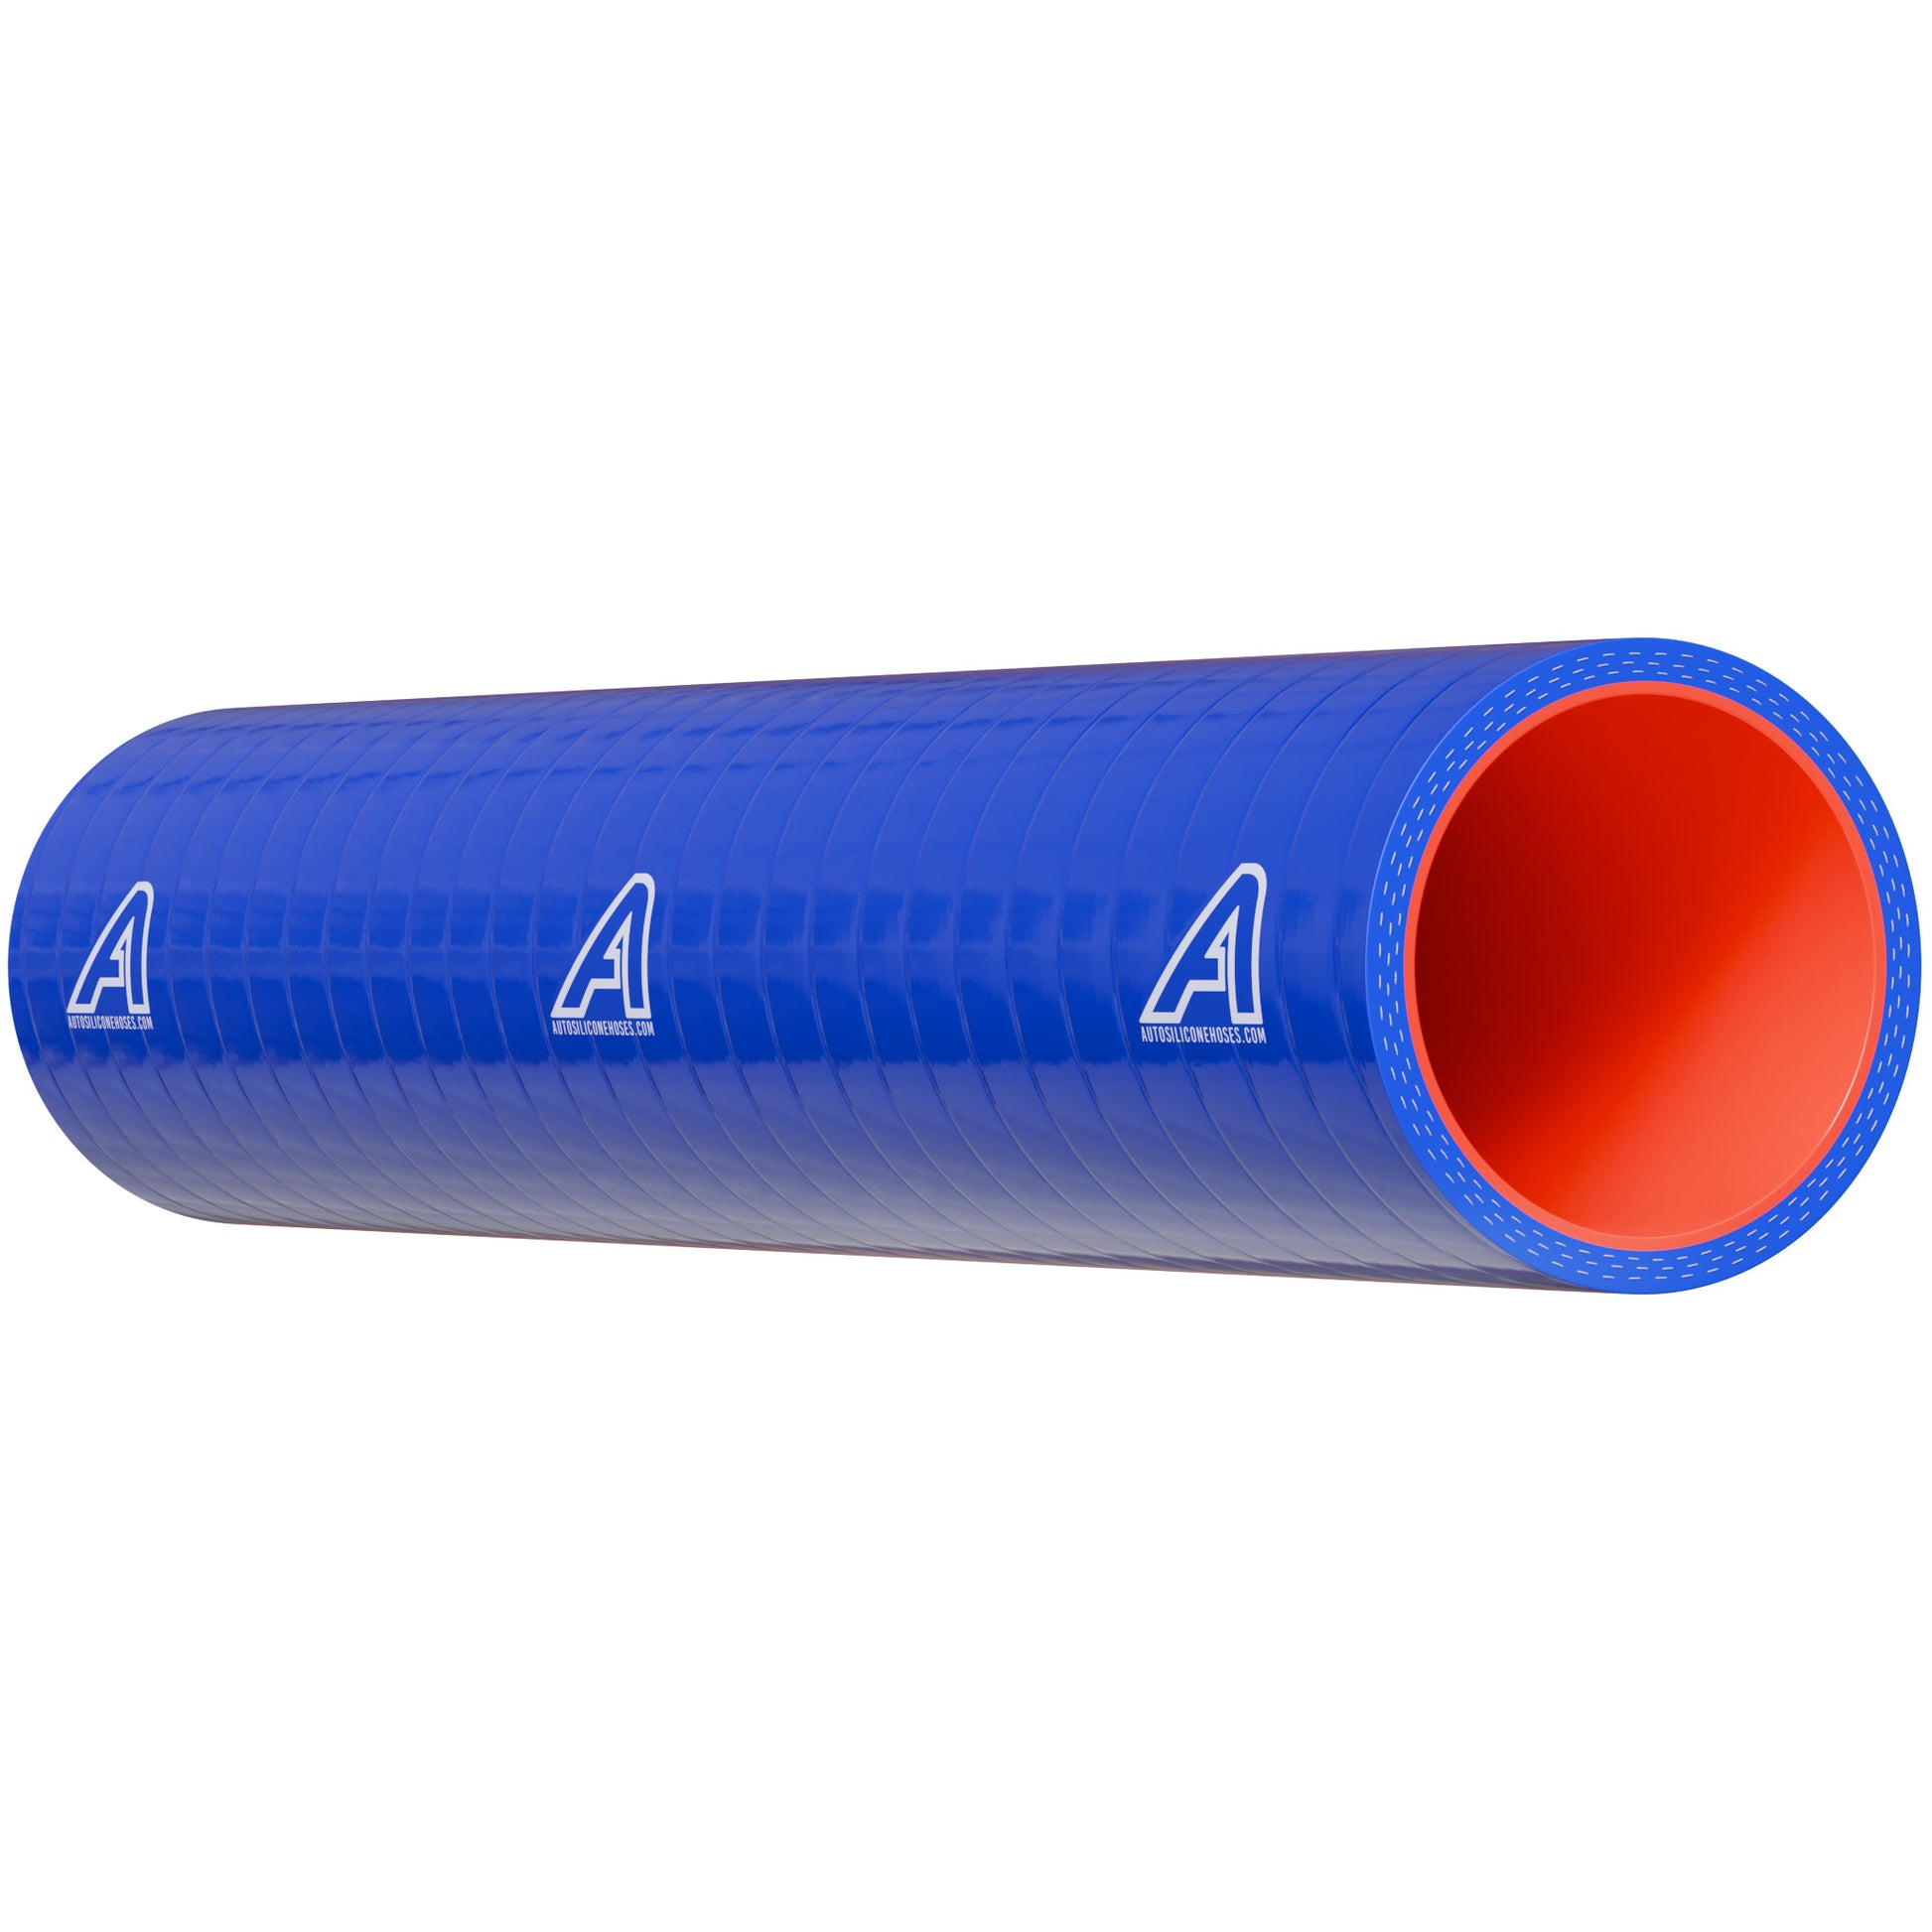 45mm ID Silicone Flouro Fuel & Oil Hose Joiner Motor Vehicle Engine Parts Auto Silicone Hoses   